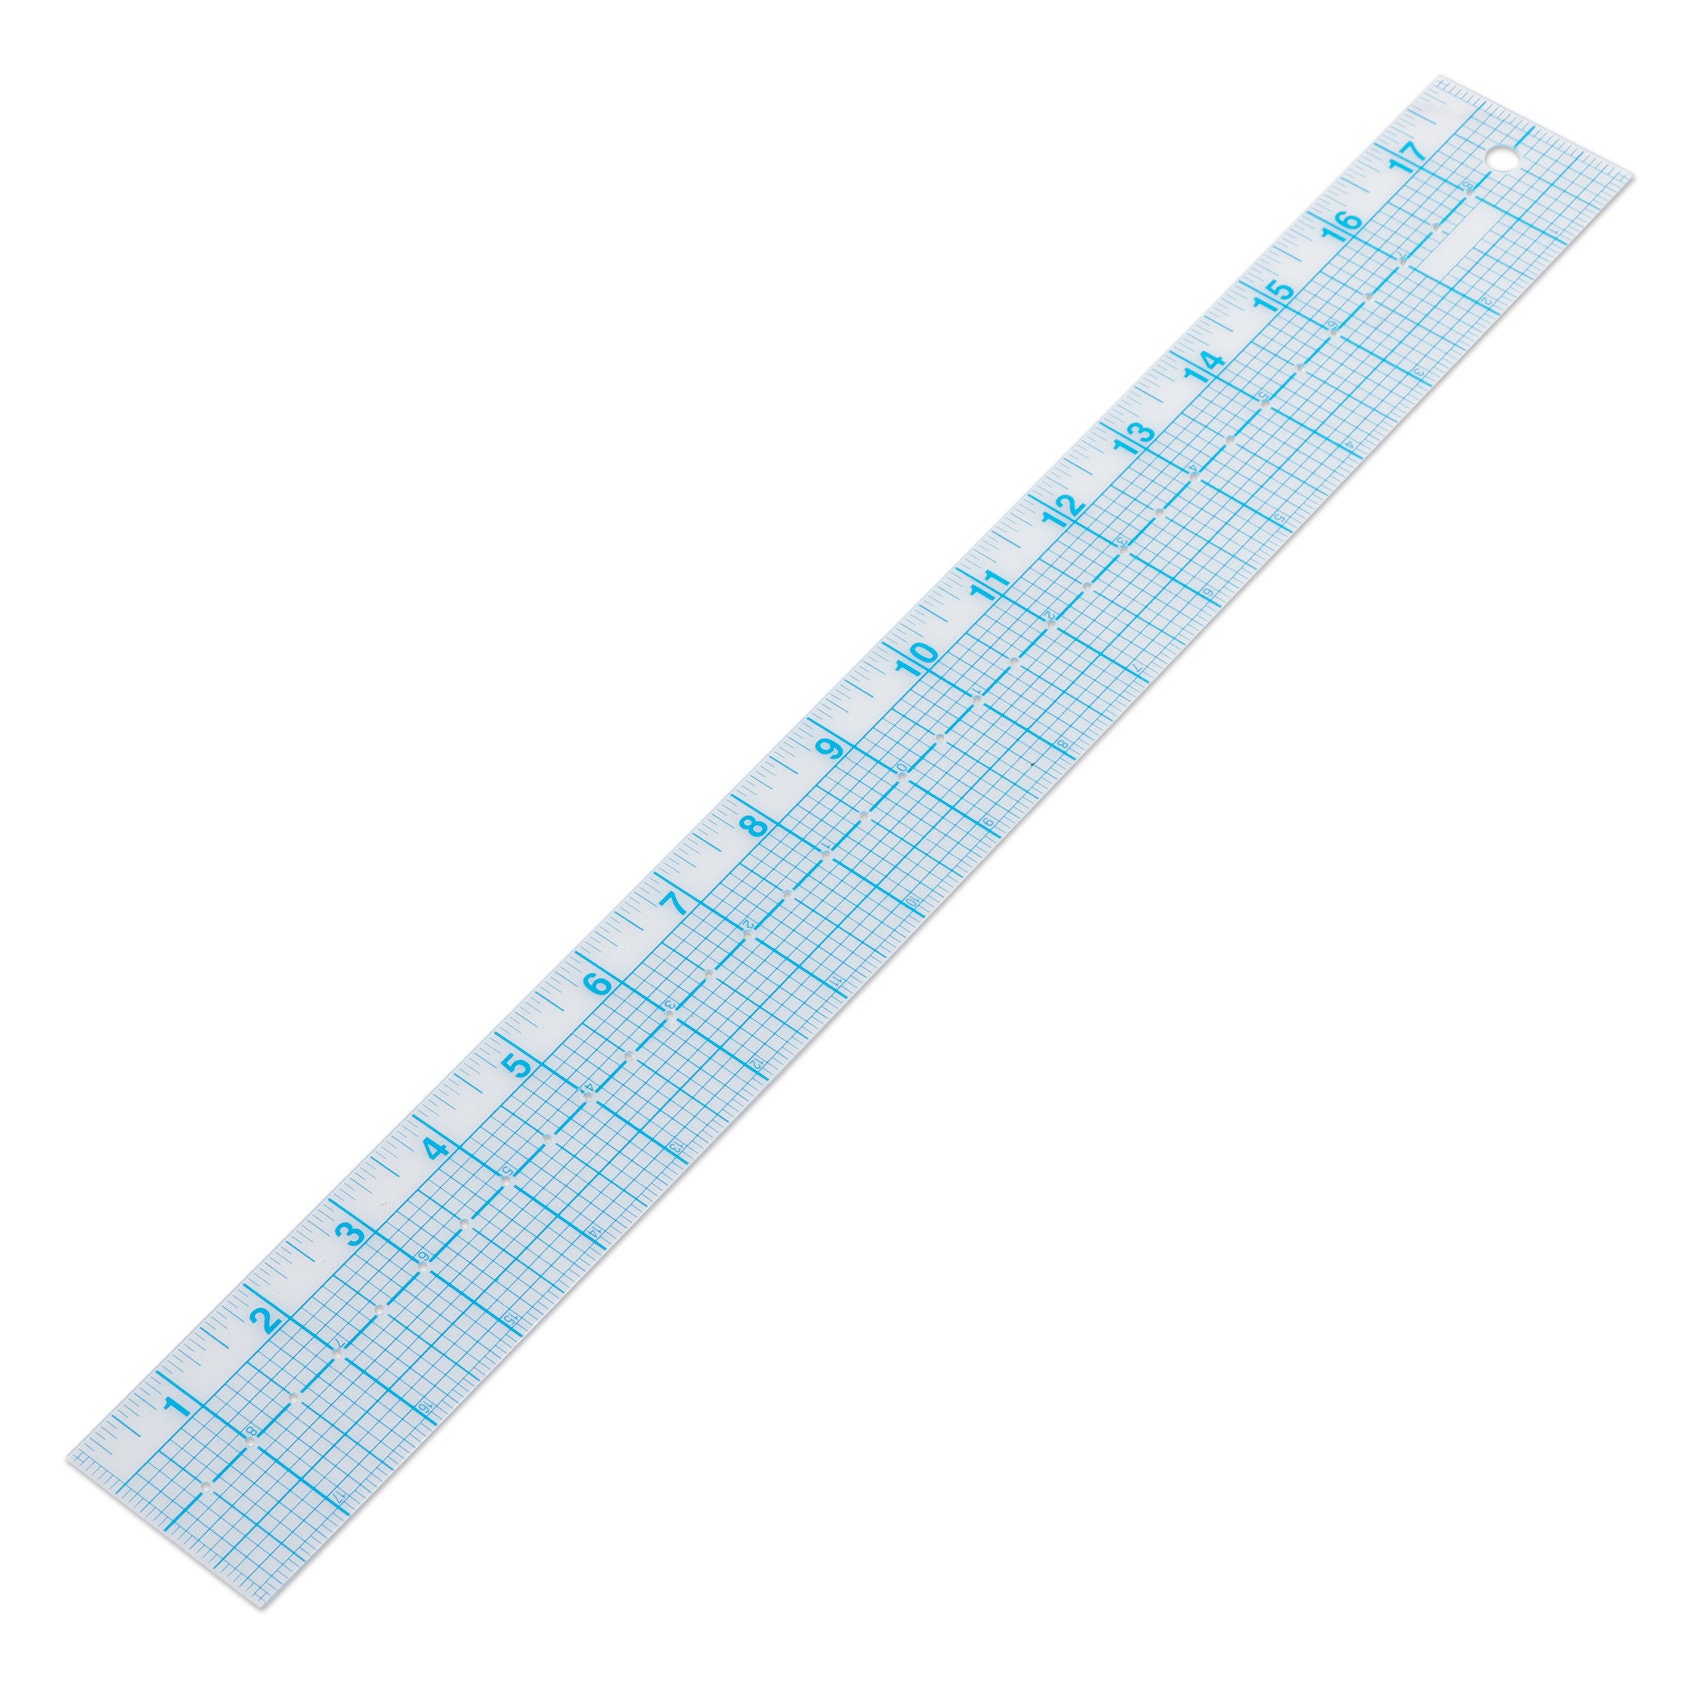  Fiskars Sewing Ruler - 6 x 24 Acrylic Ruler - Sewing and Quilting  Ruler with Gridlines - Arts and Craft Supplies - Clear/Red